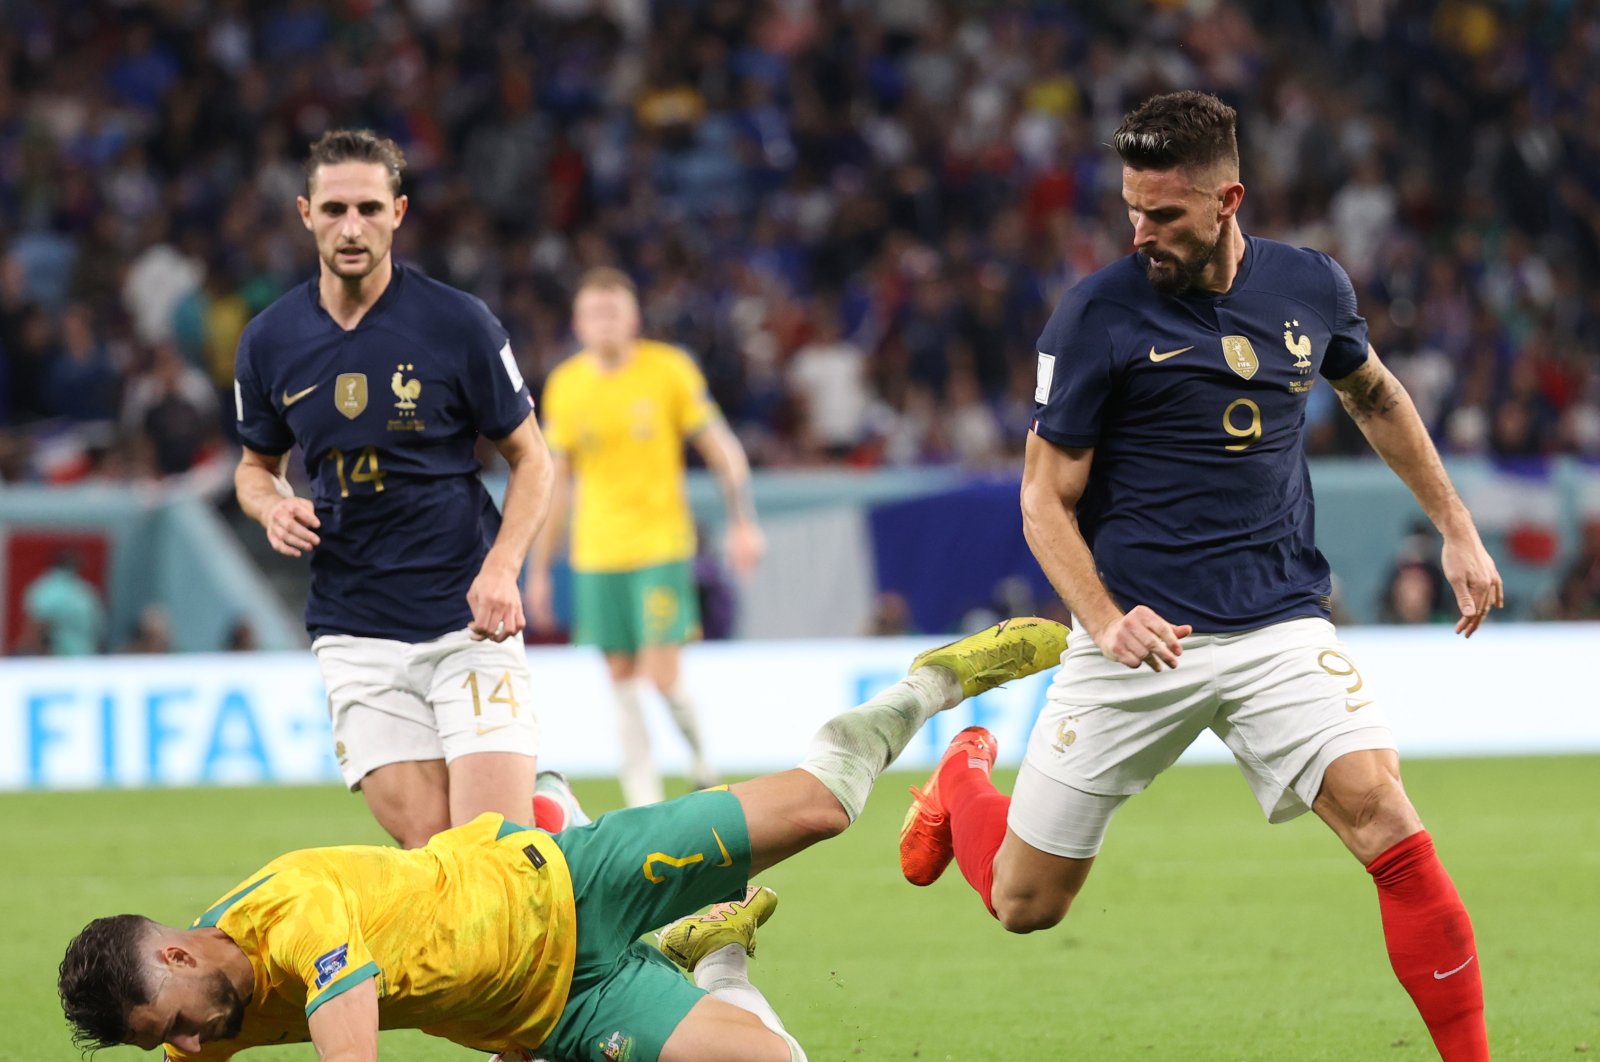 Olivier Giroud (R) of France in action against Mathew Leckie of Australia during the FIFA World Cup 2022 Group D soccer match between France and Australia at Al Janoub Stadium in Al Wakrah, Qatar, Nov. 22, 2022. (EPA Photo)